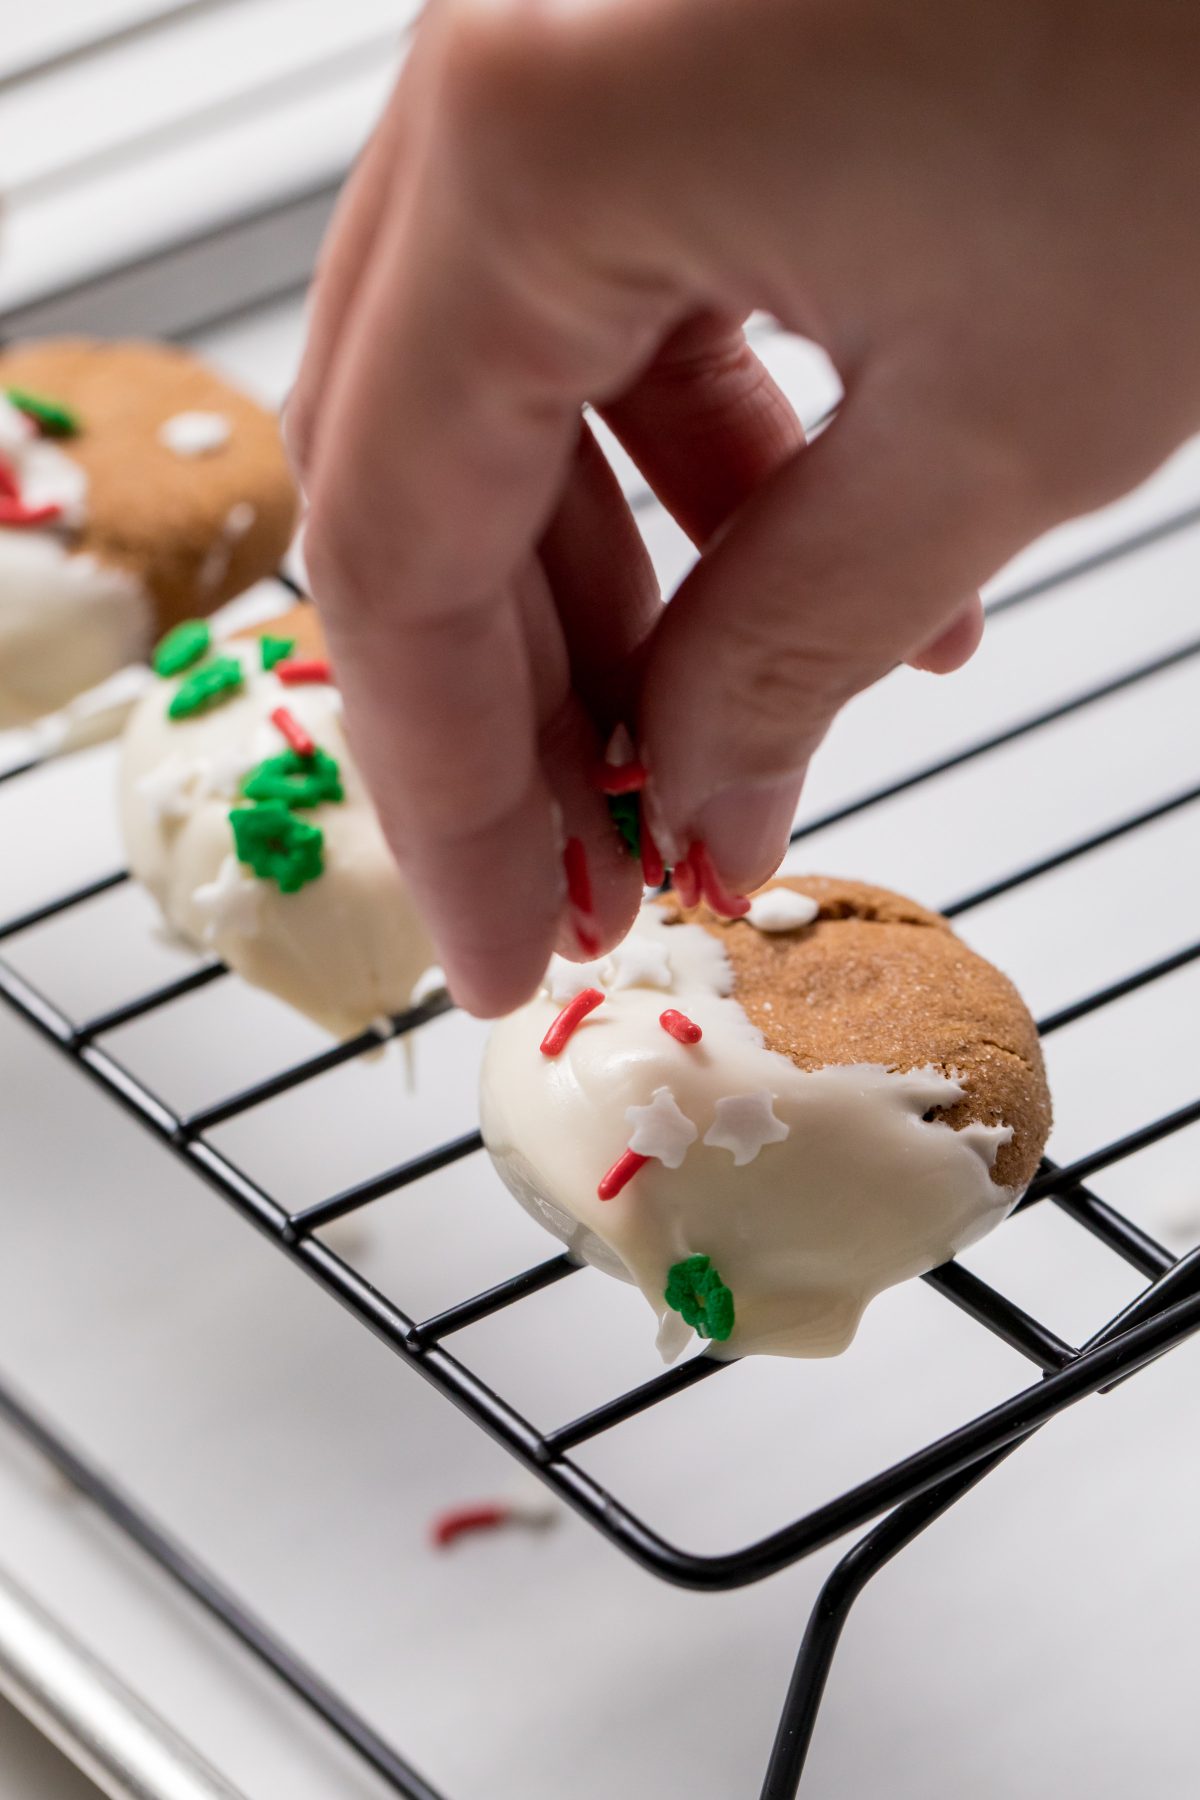 5D4B5641 - White Chocolate Dipped Gingerbread Cookies - Add sprinkles